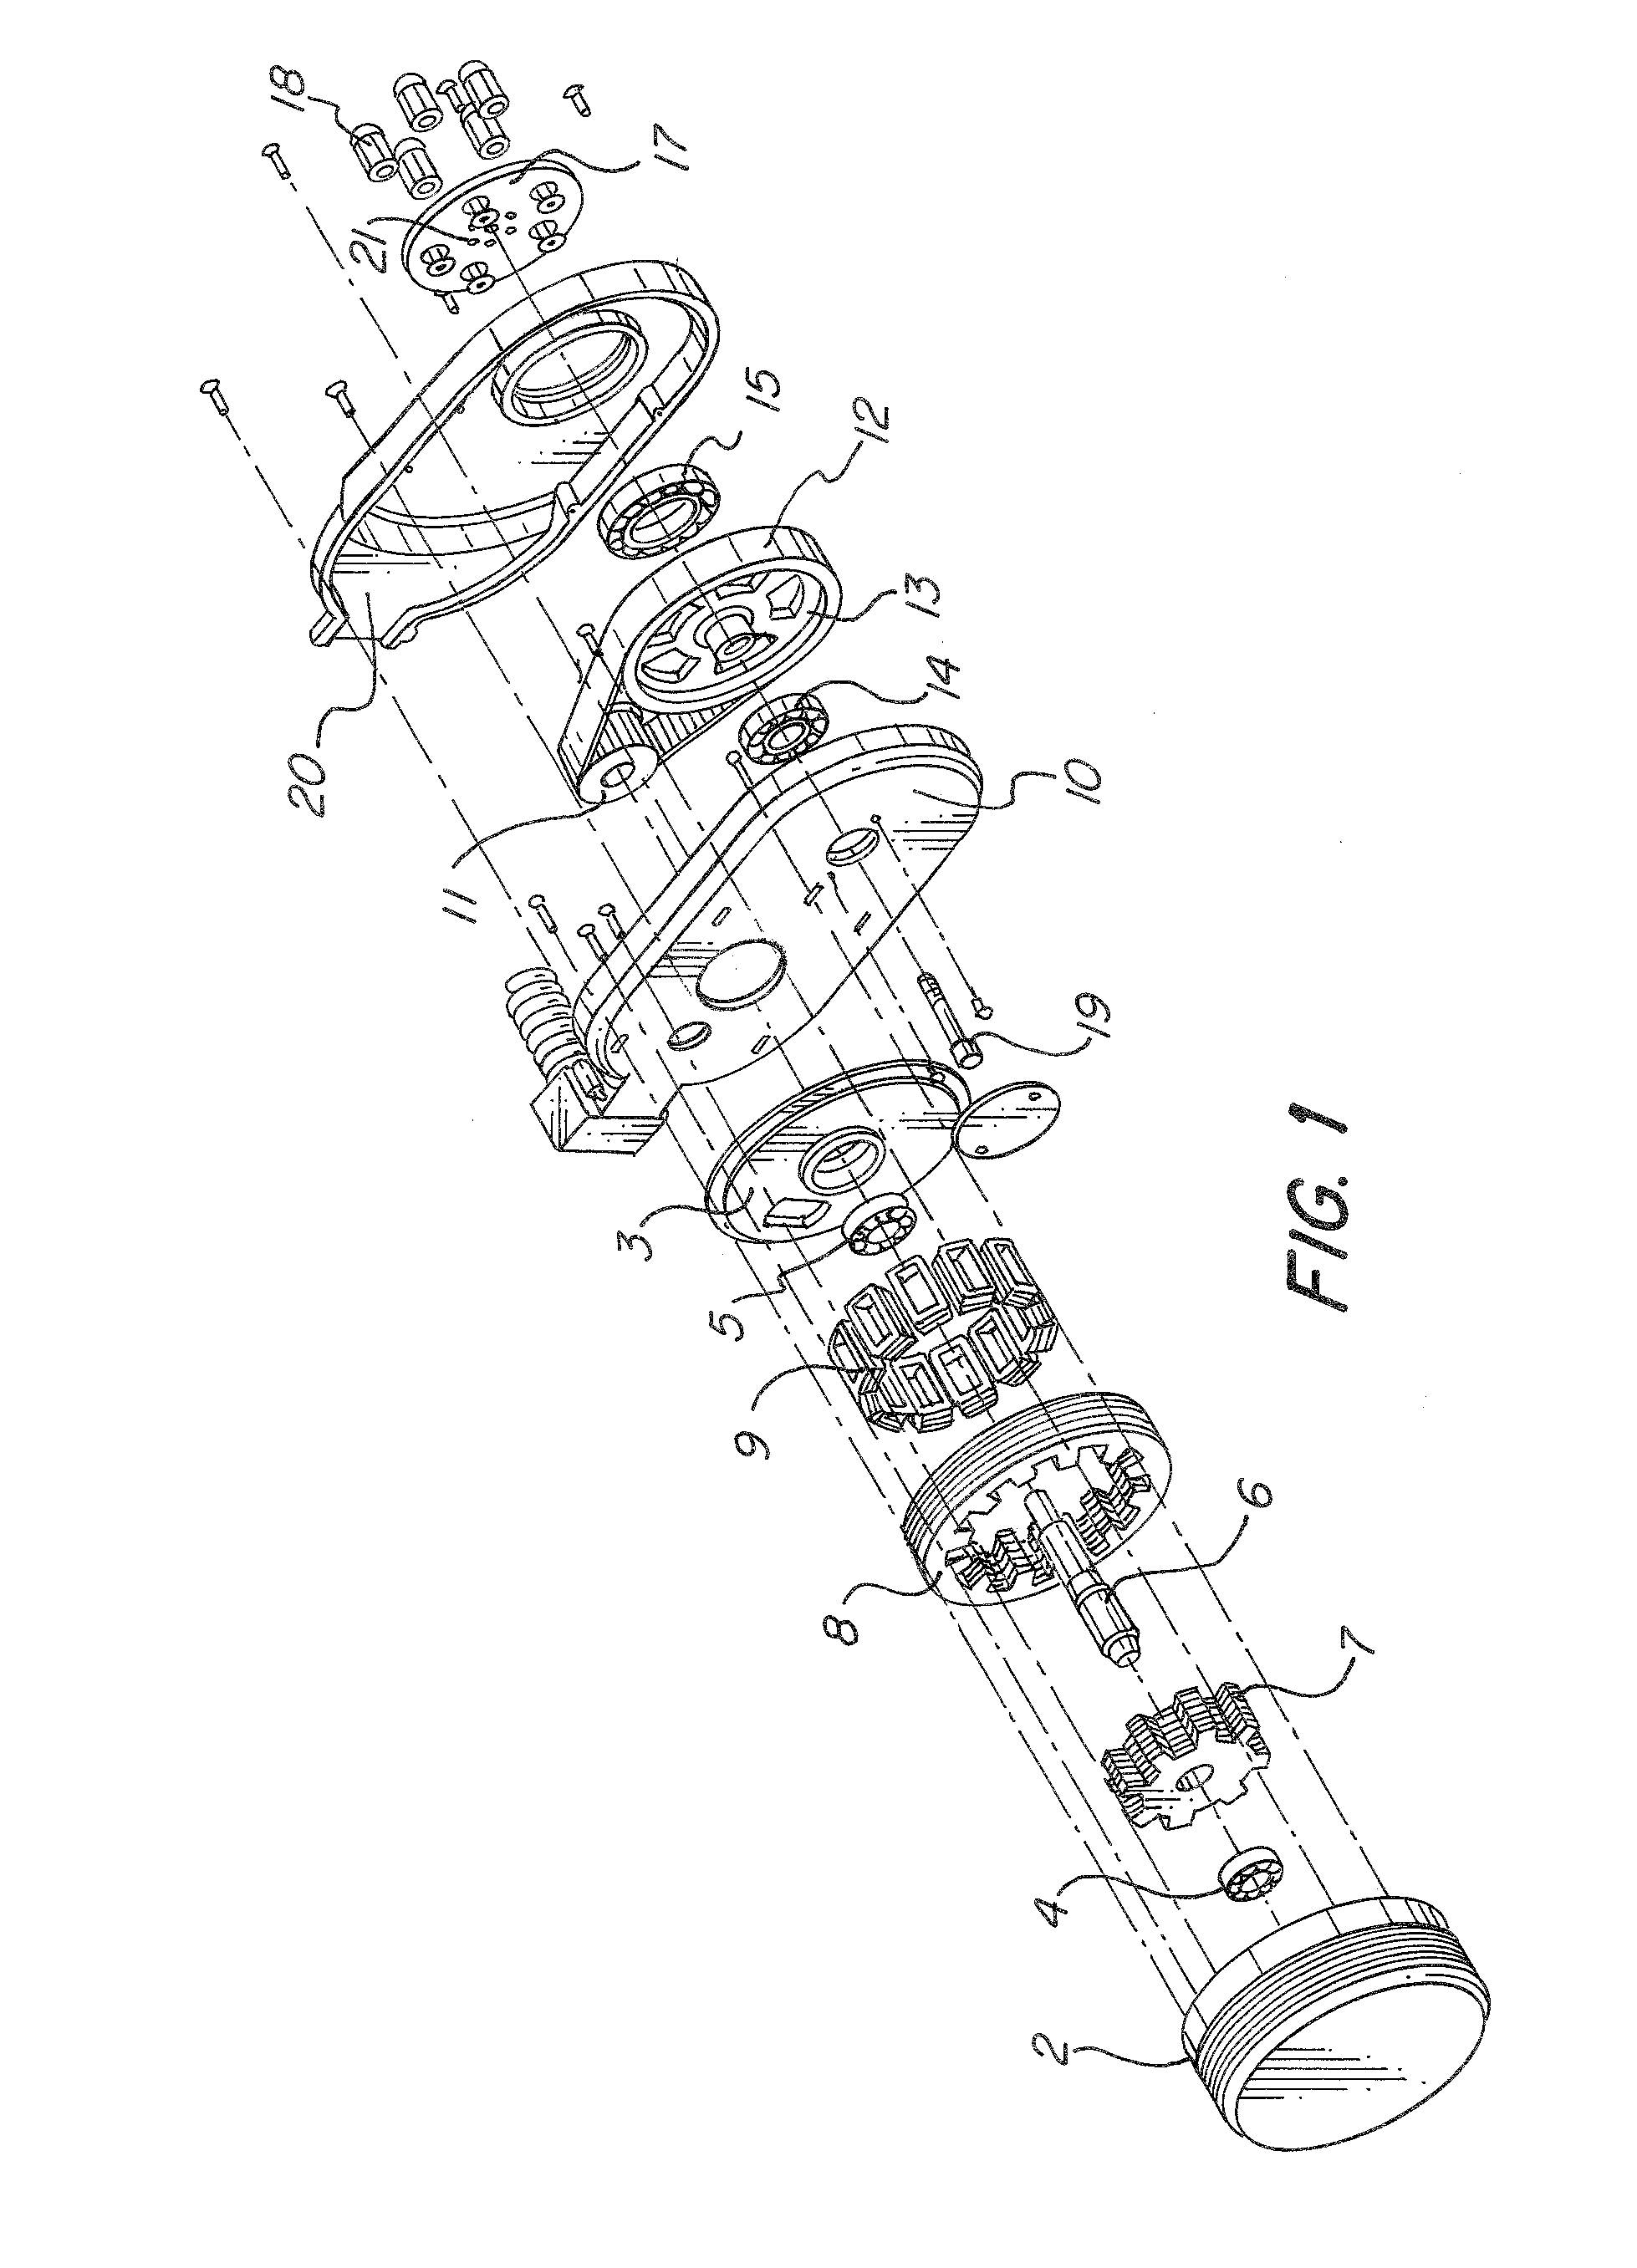 Hybrid vehicle system with indirect drive